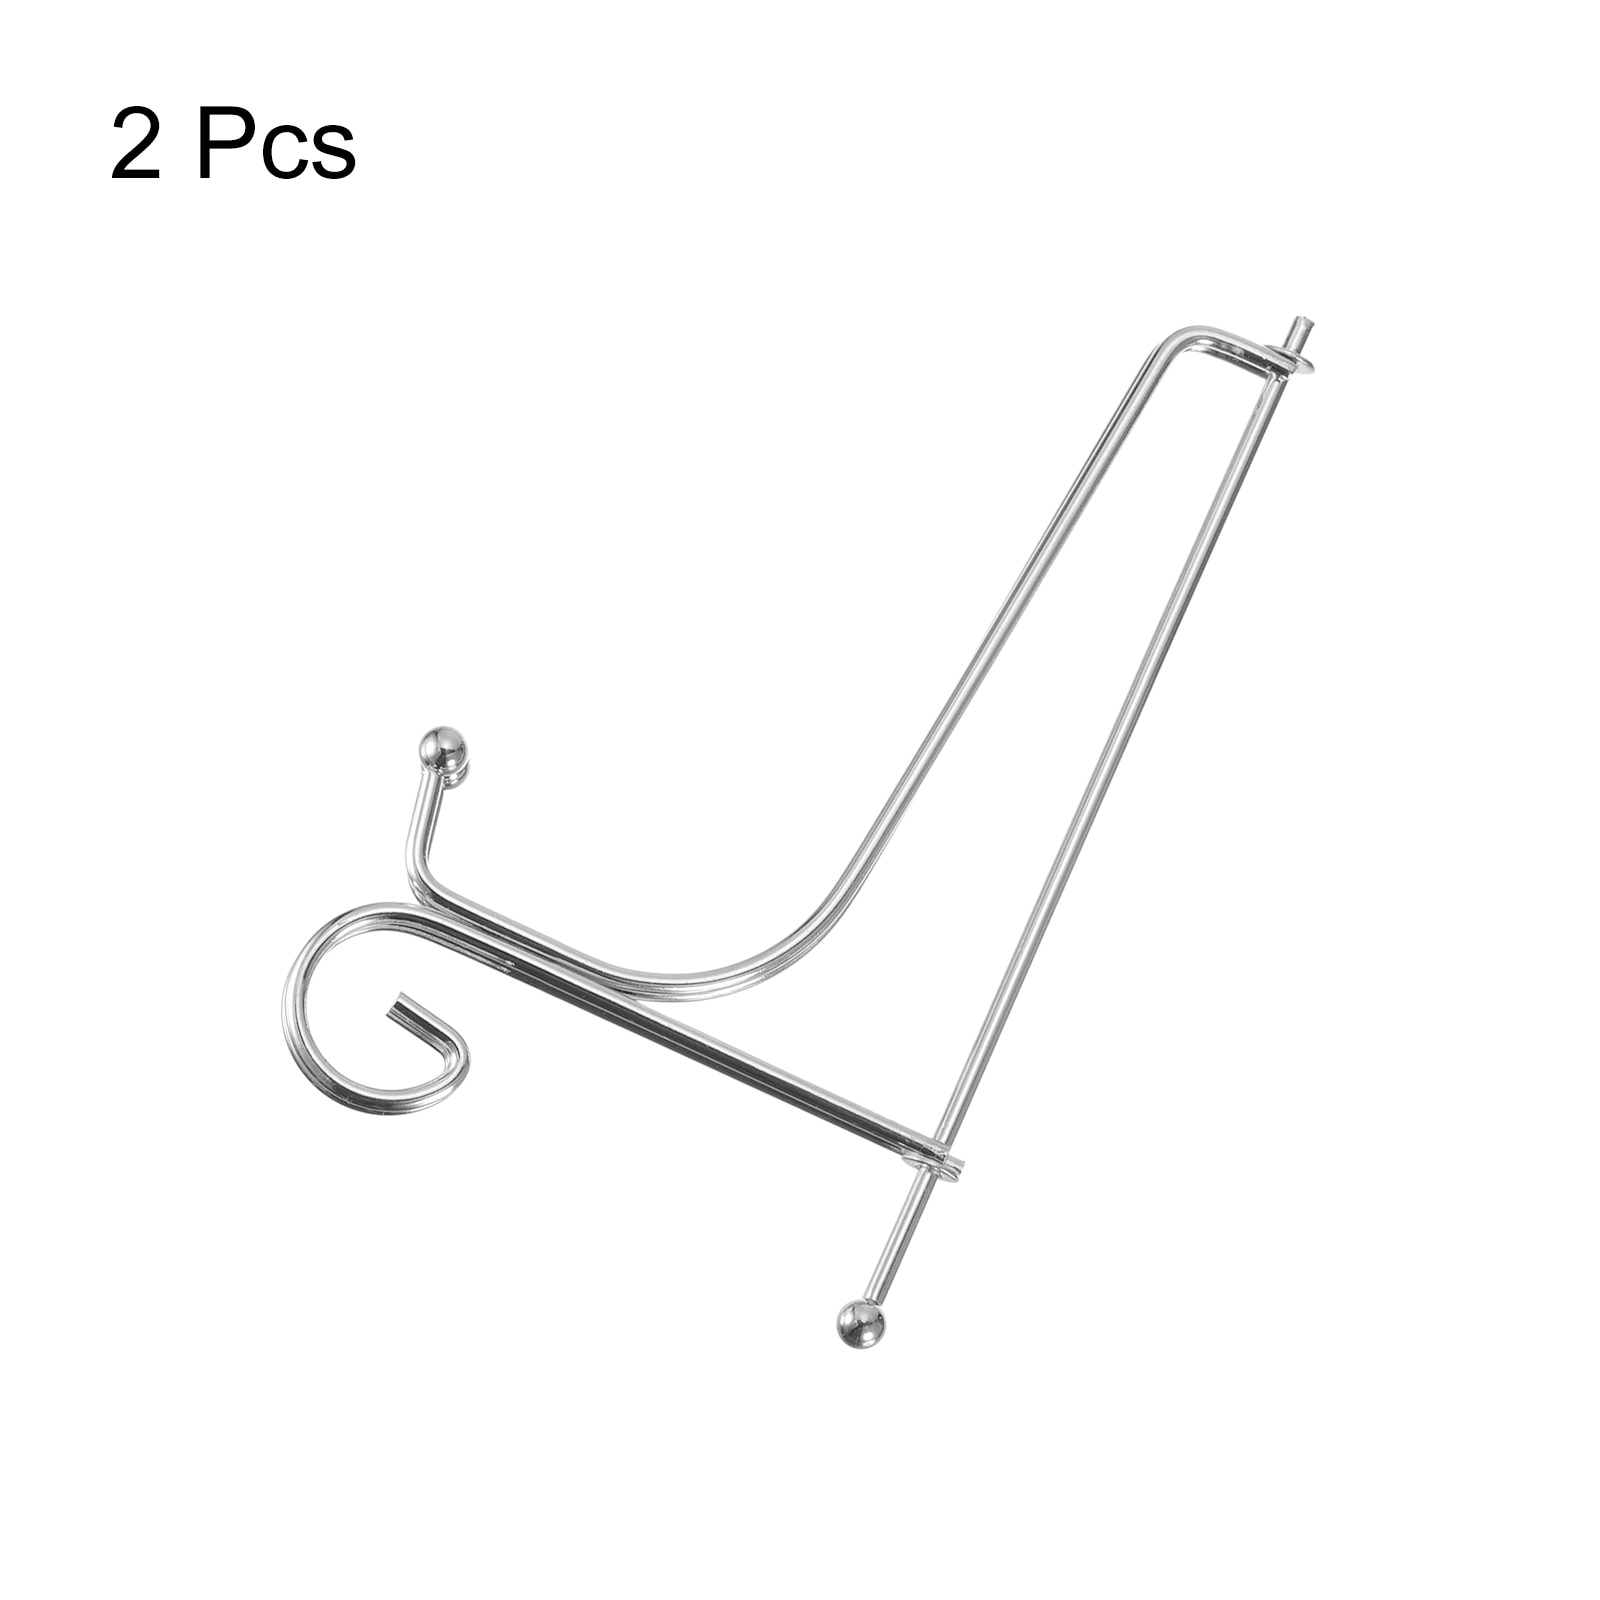 2pcs Plate Holder Plate Stands for Display Silver Iron Display